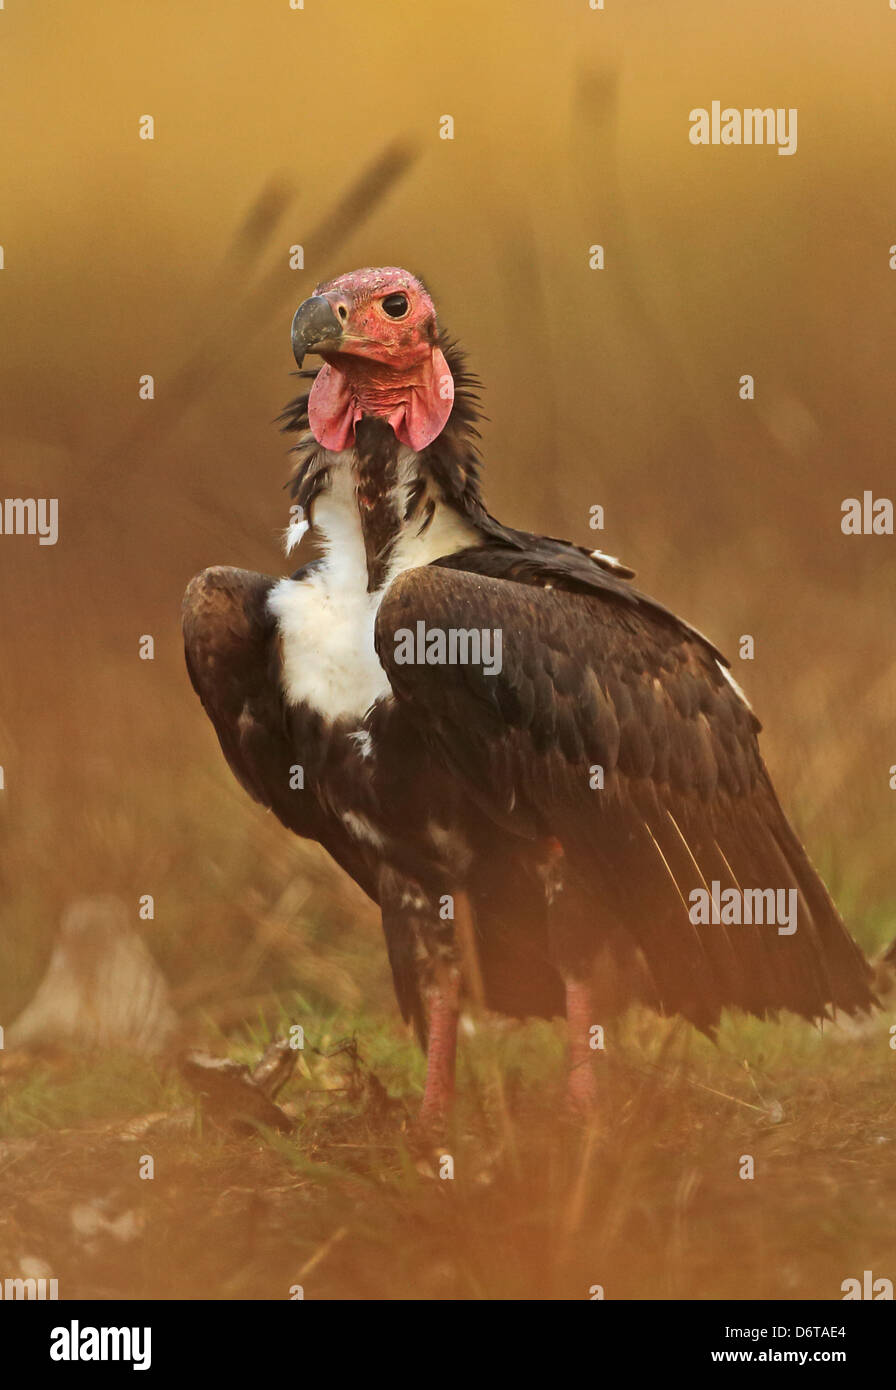 Red-headed Vulture (Sarcogyps calvus) adult, standing on ground, Veal Krous 'vulture restaurant', Cambodia, January Stock Photo